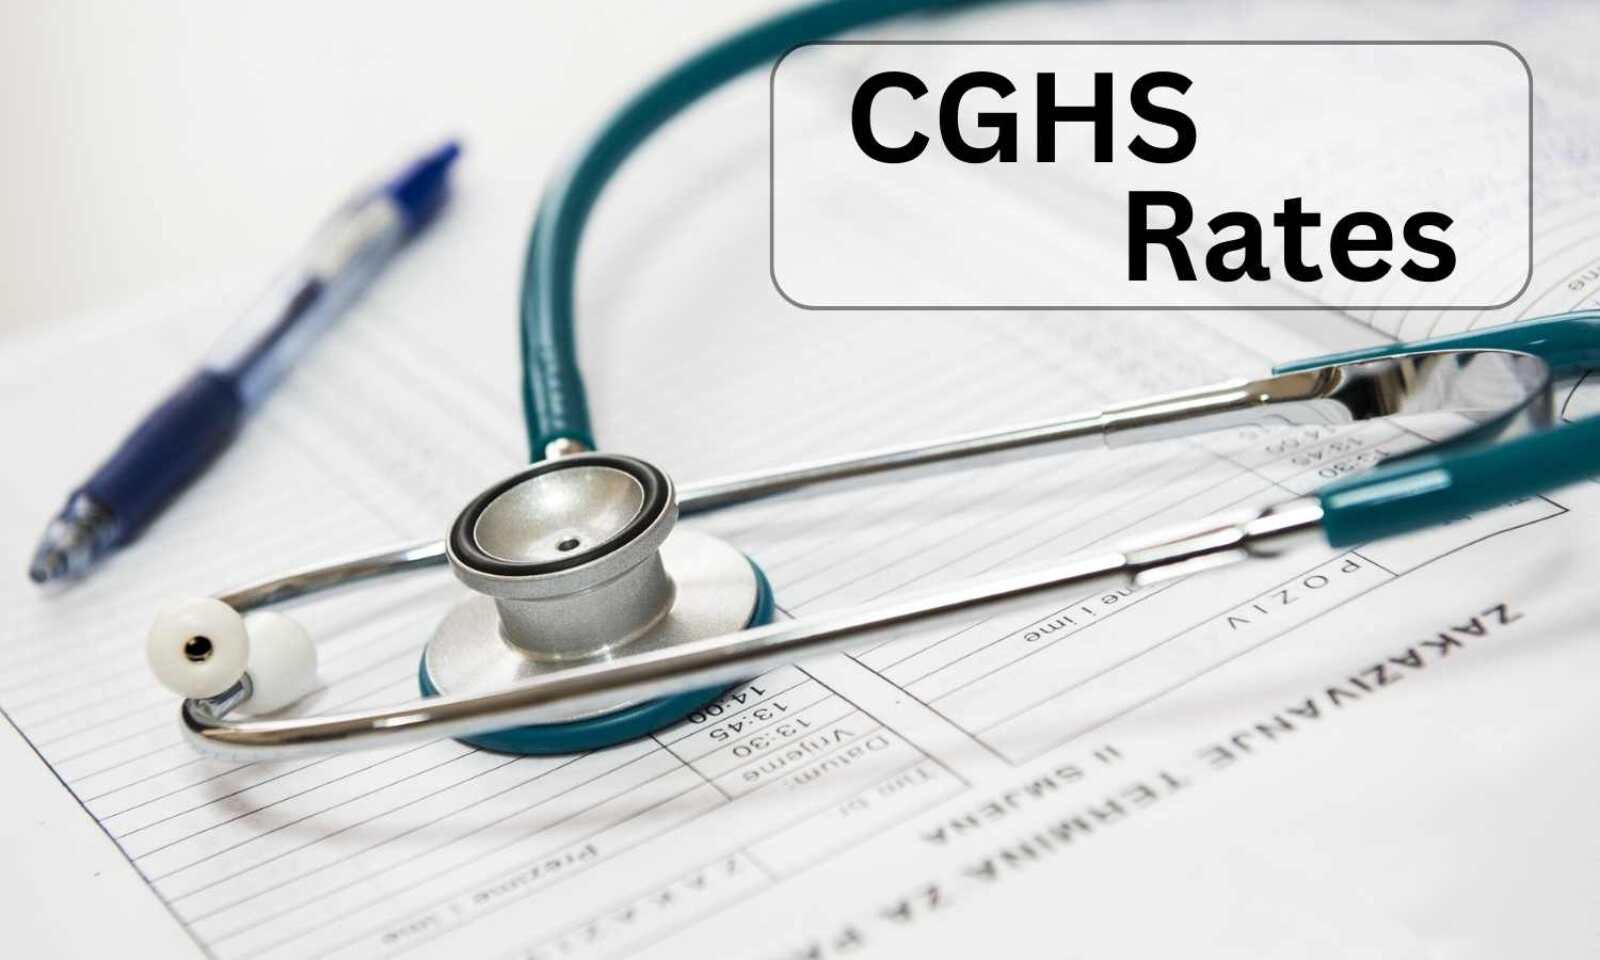 Revision of CGHS rates for 36 Radiological / Imaging investigations: CGHS